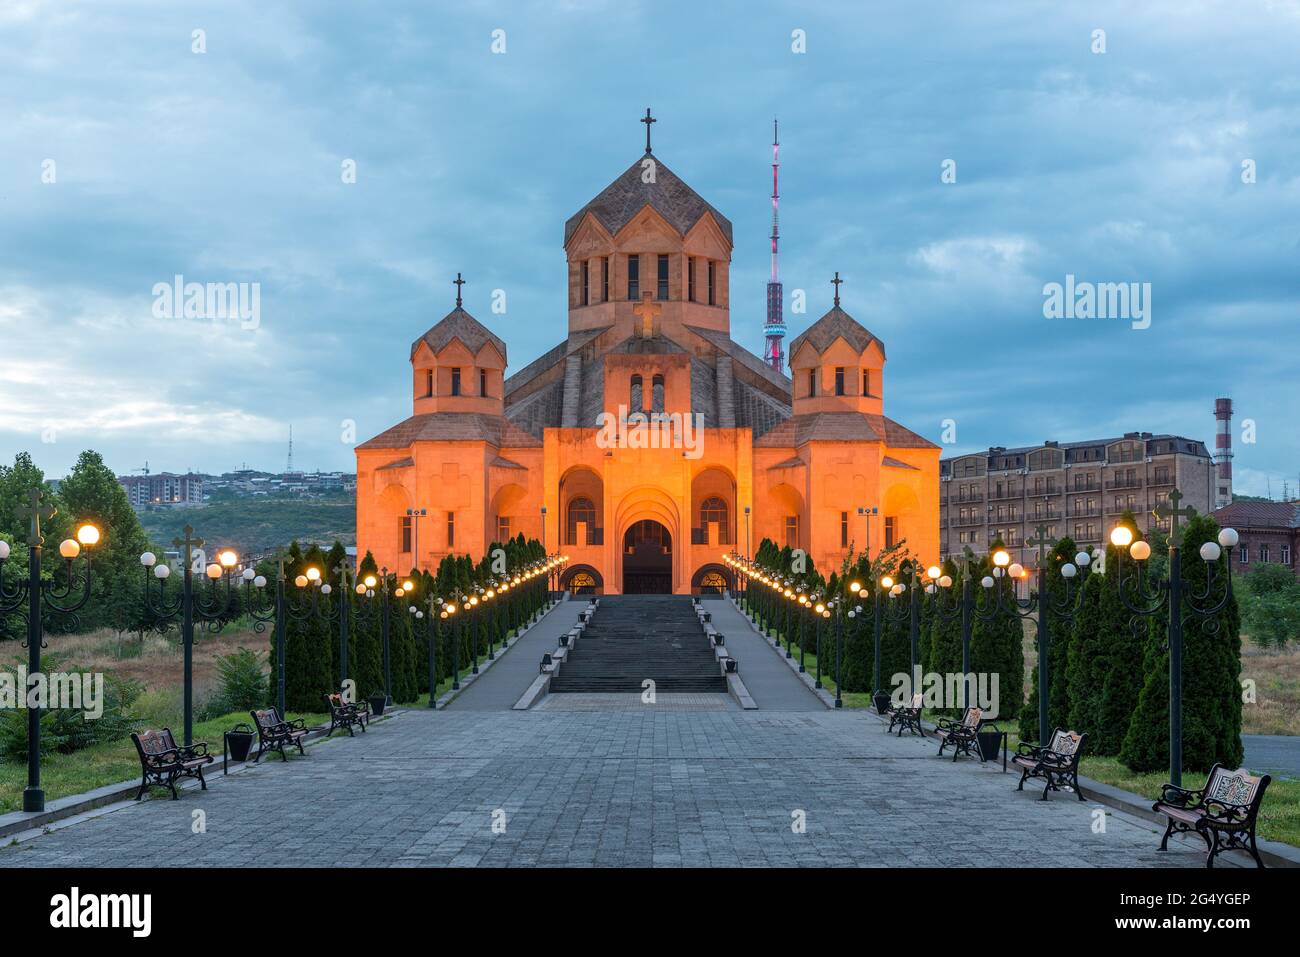 Orthodox church of St. Gregory in the evening, Erevan, Armenia Stock Photo